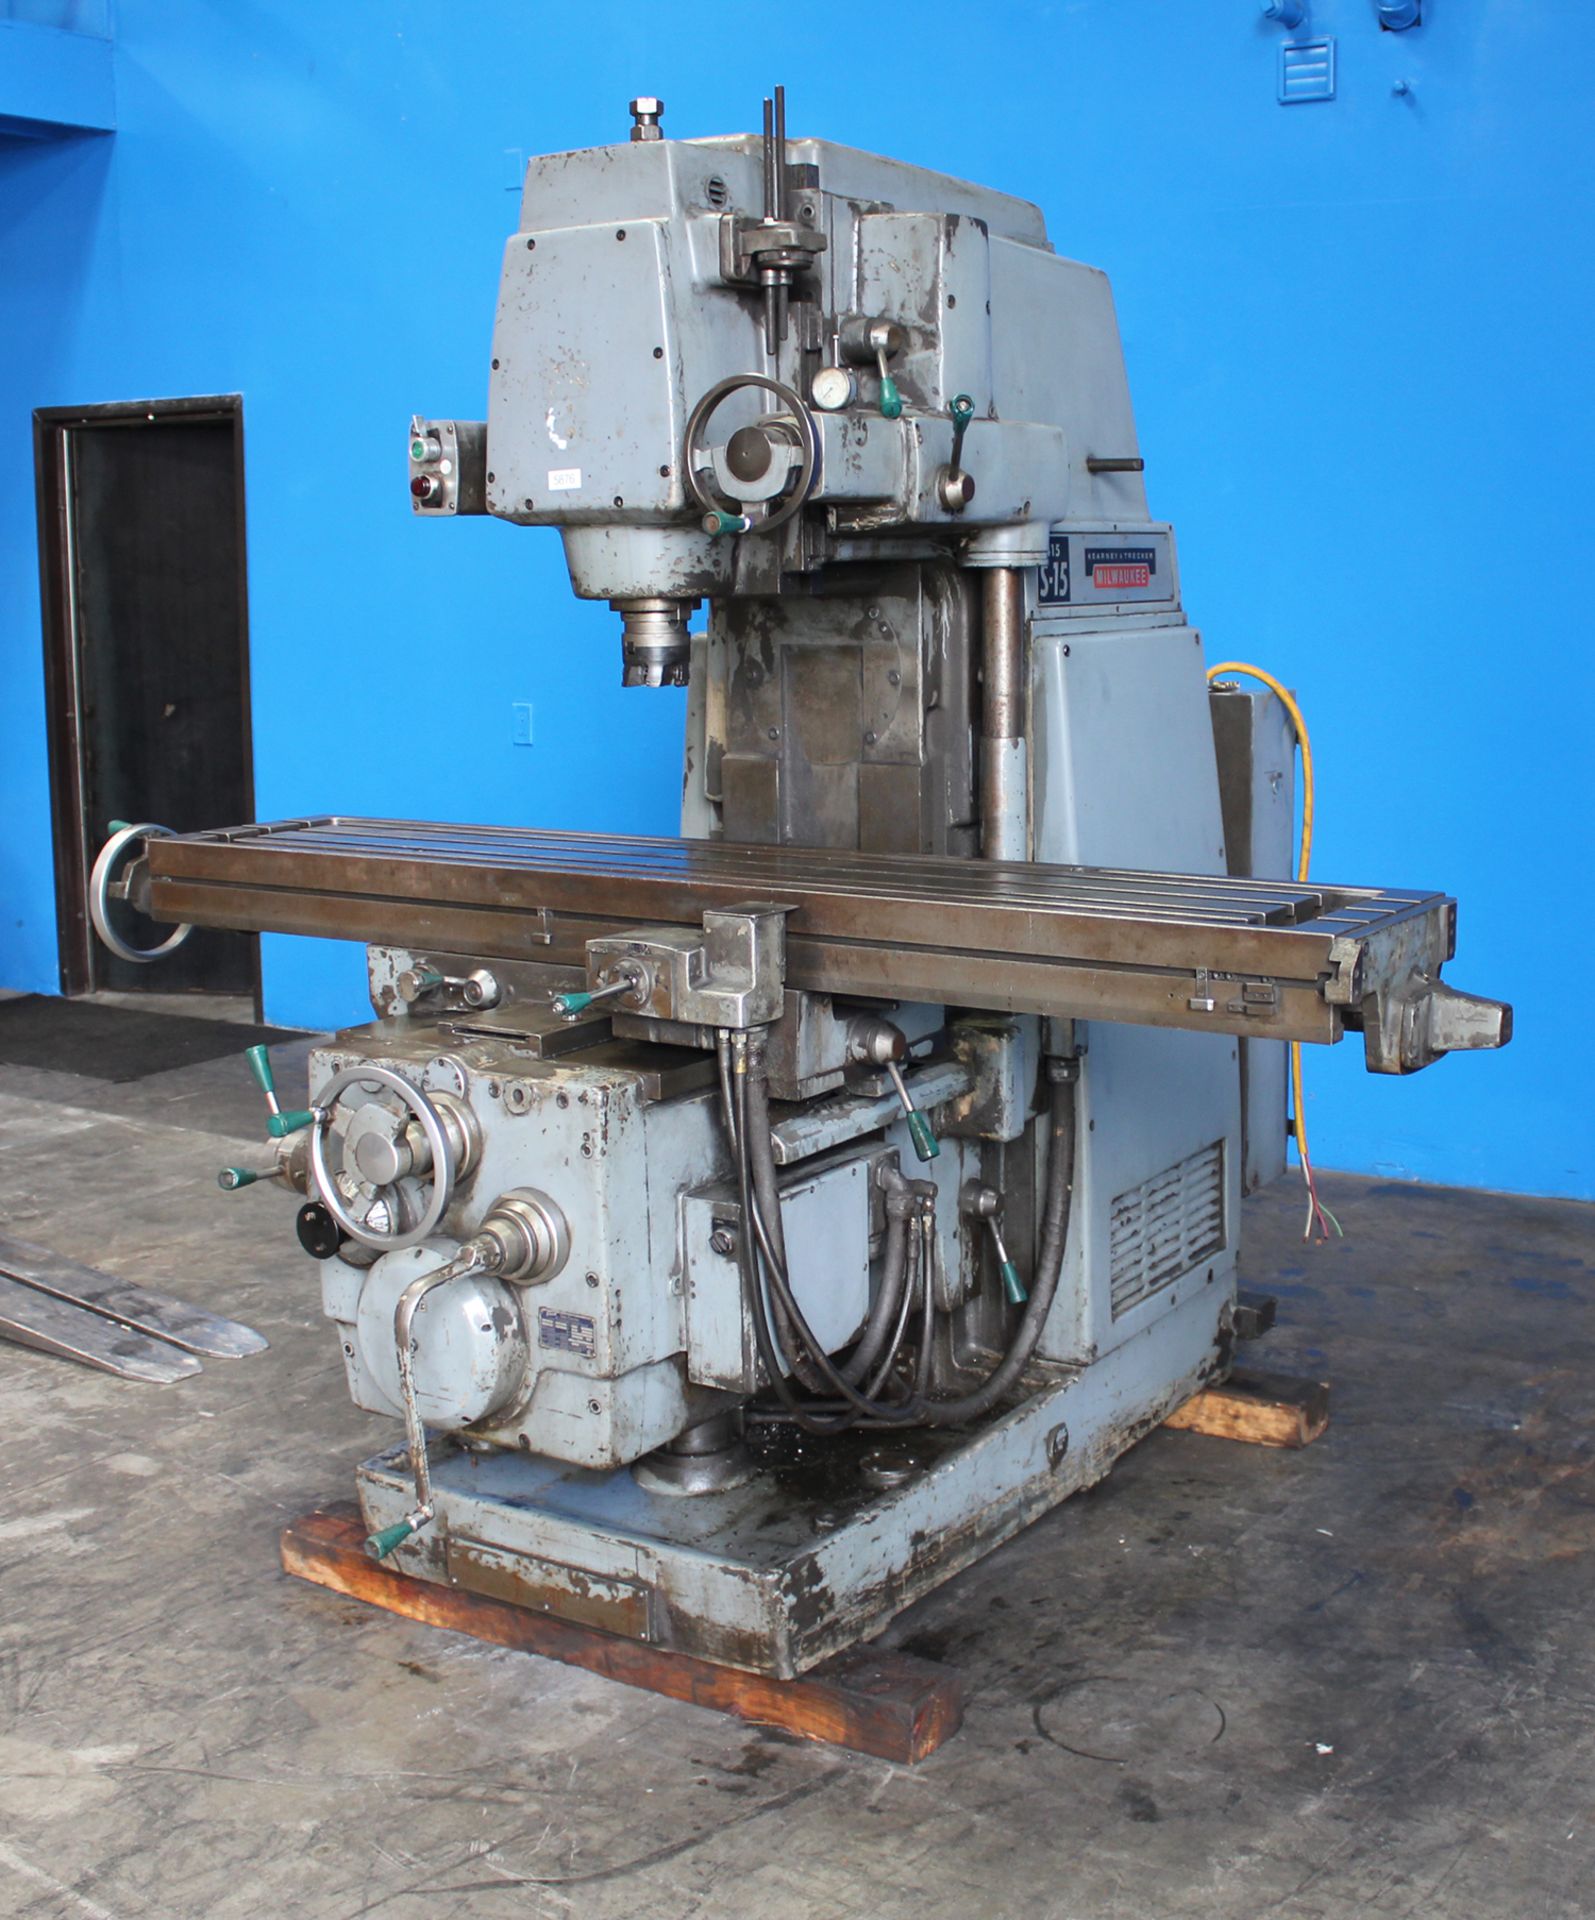 15" x 76" Table Kearney Trecker K&T 415 S-15 Vertical Milling Machine - Located In: Huntington Park, - Image 2 of 8